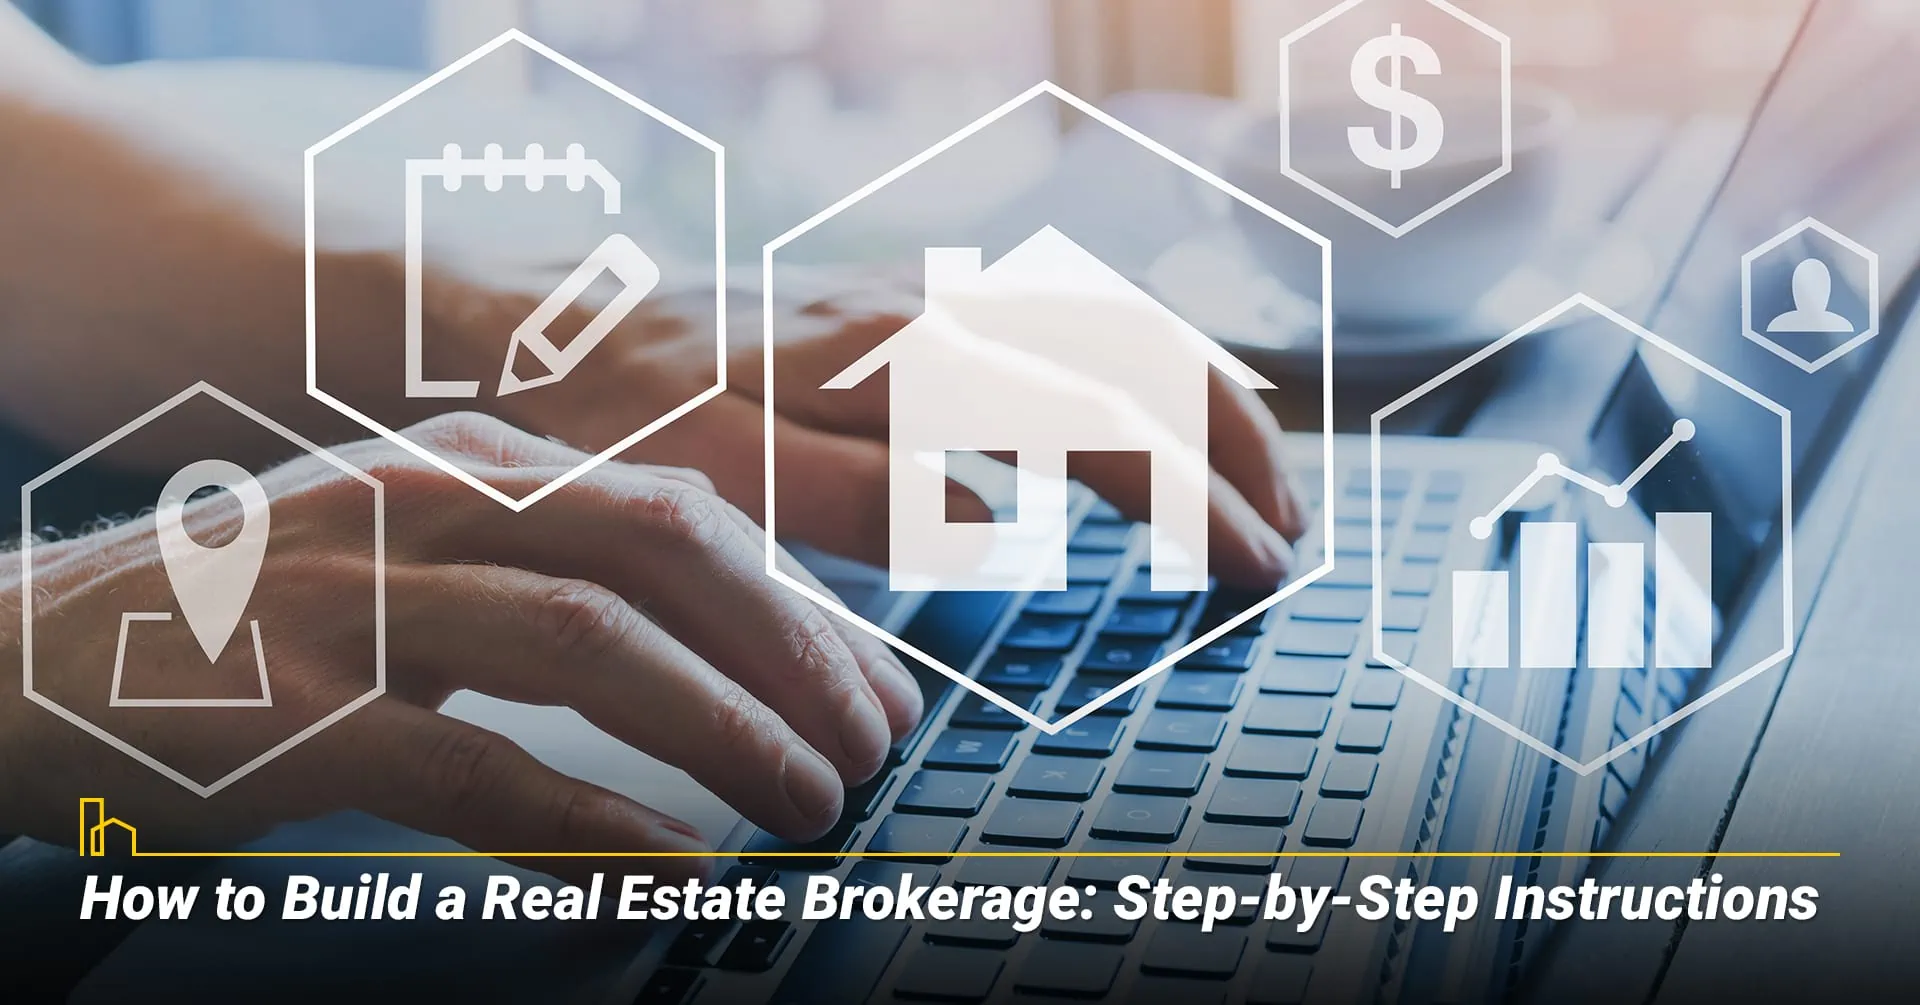 How to Build a Real Estate Brokerage